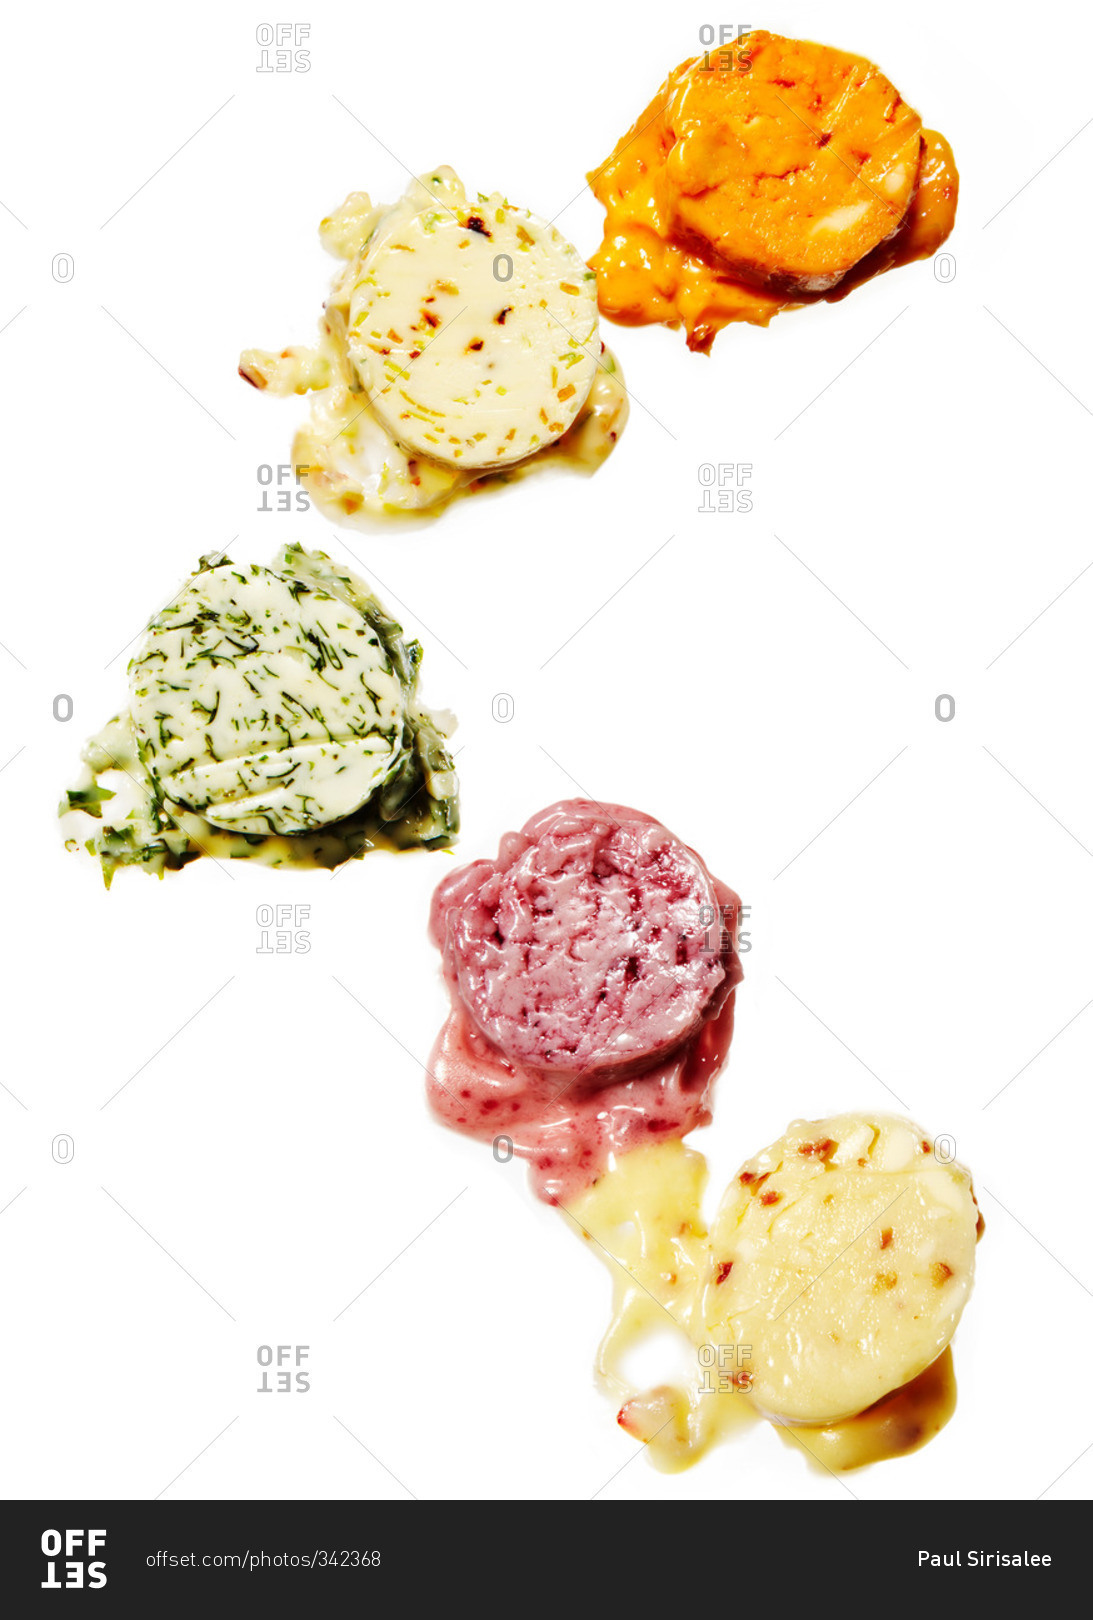 Pats of colorful, savory butter on a white background